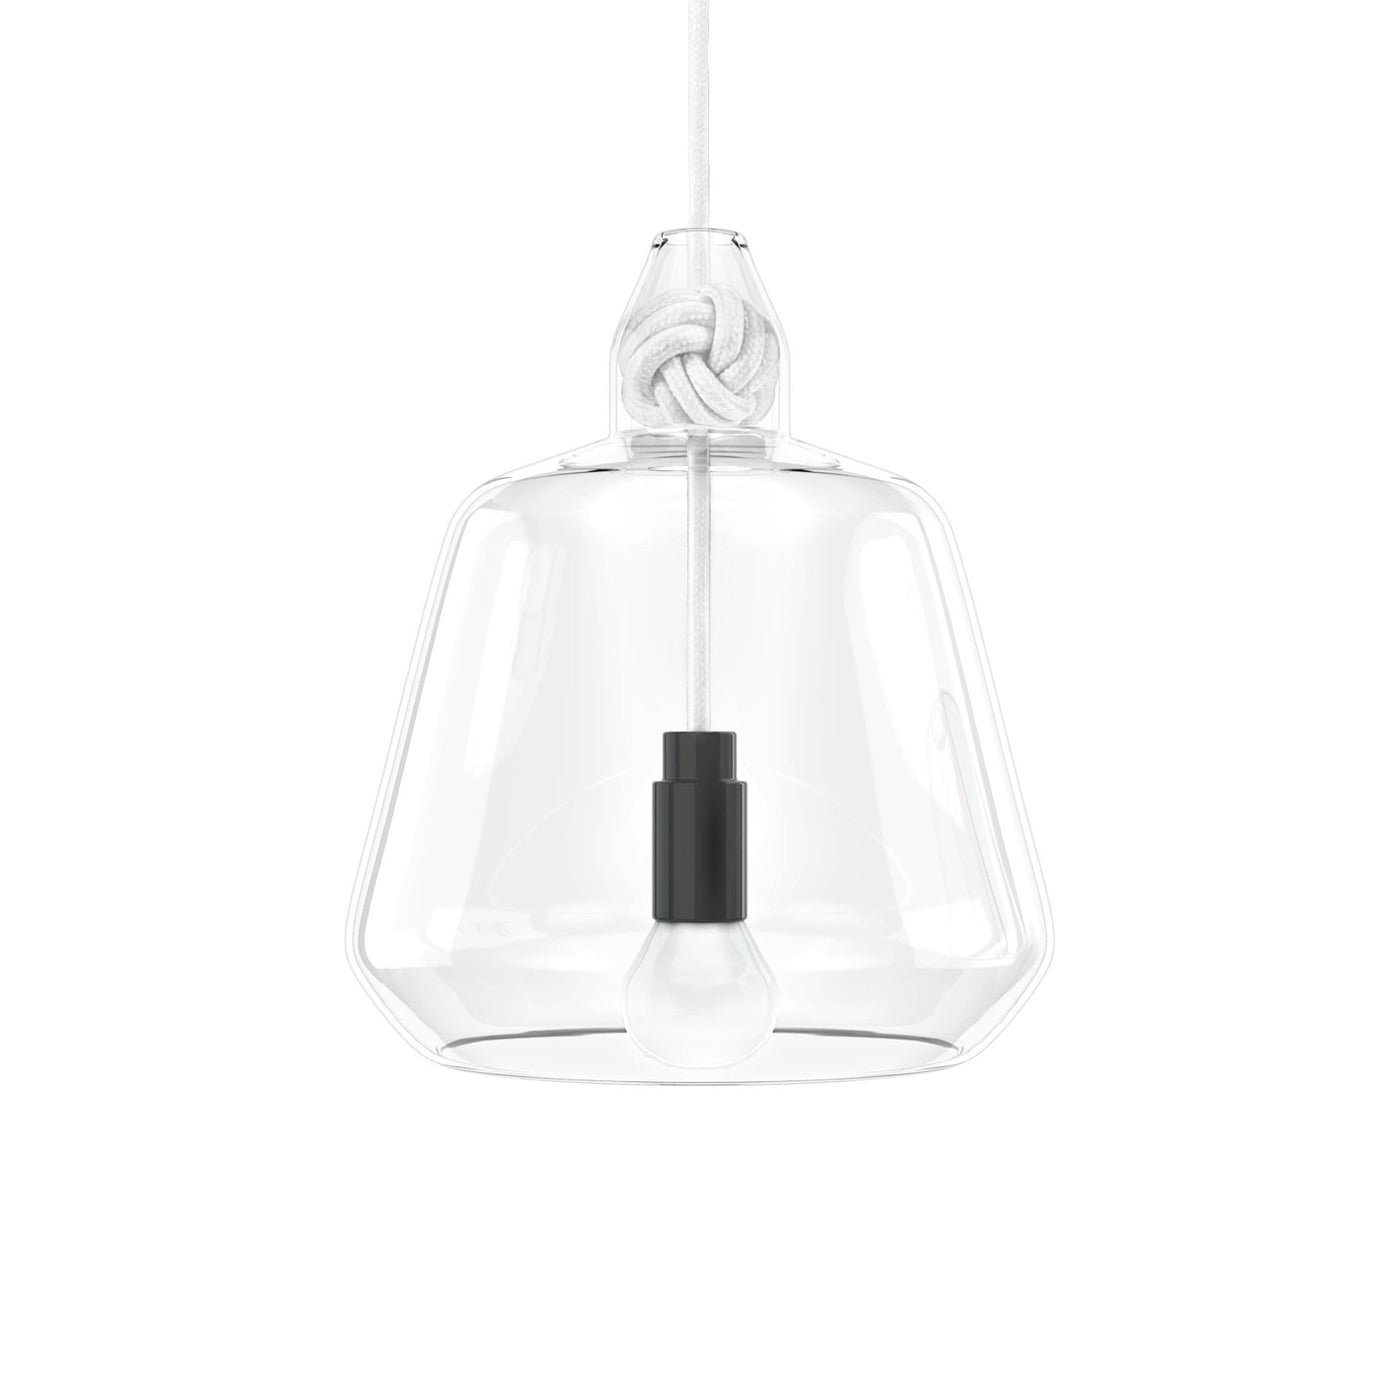 Vitamin Large Knot Pendant Lamp in white. Buy now from someday designs